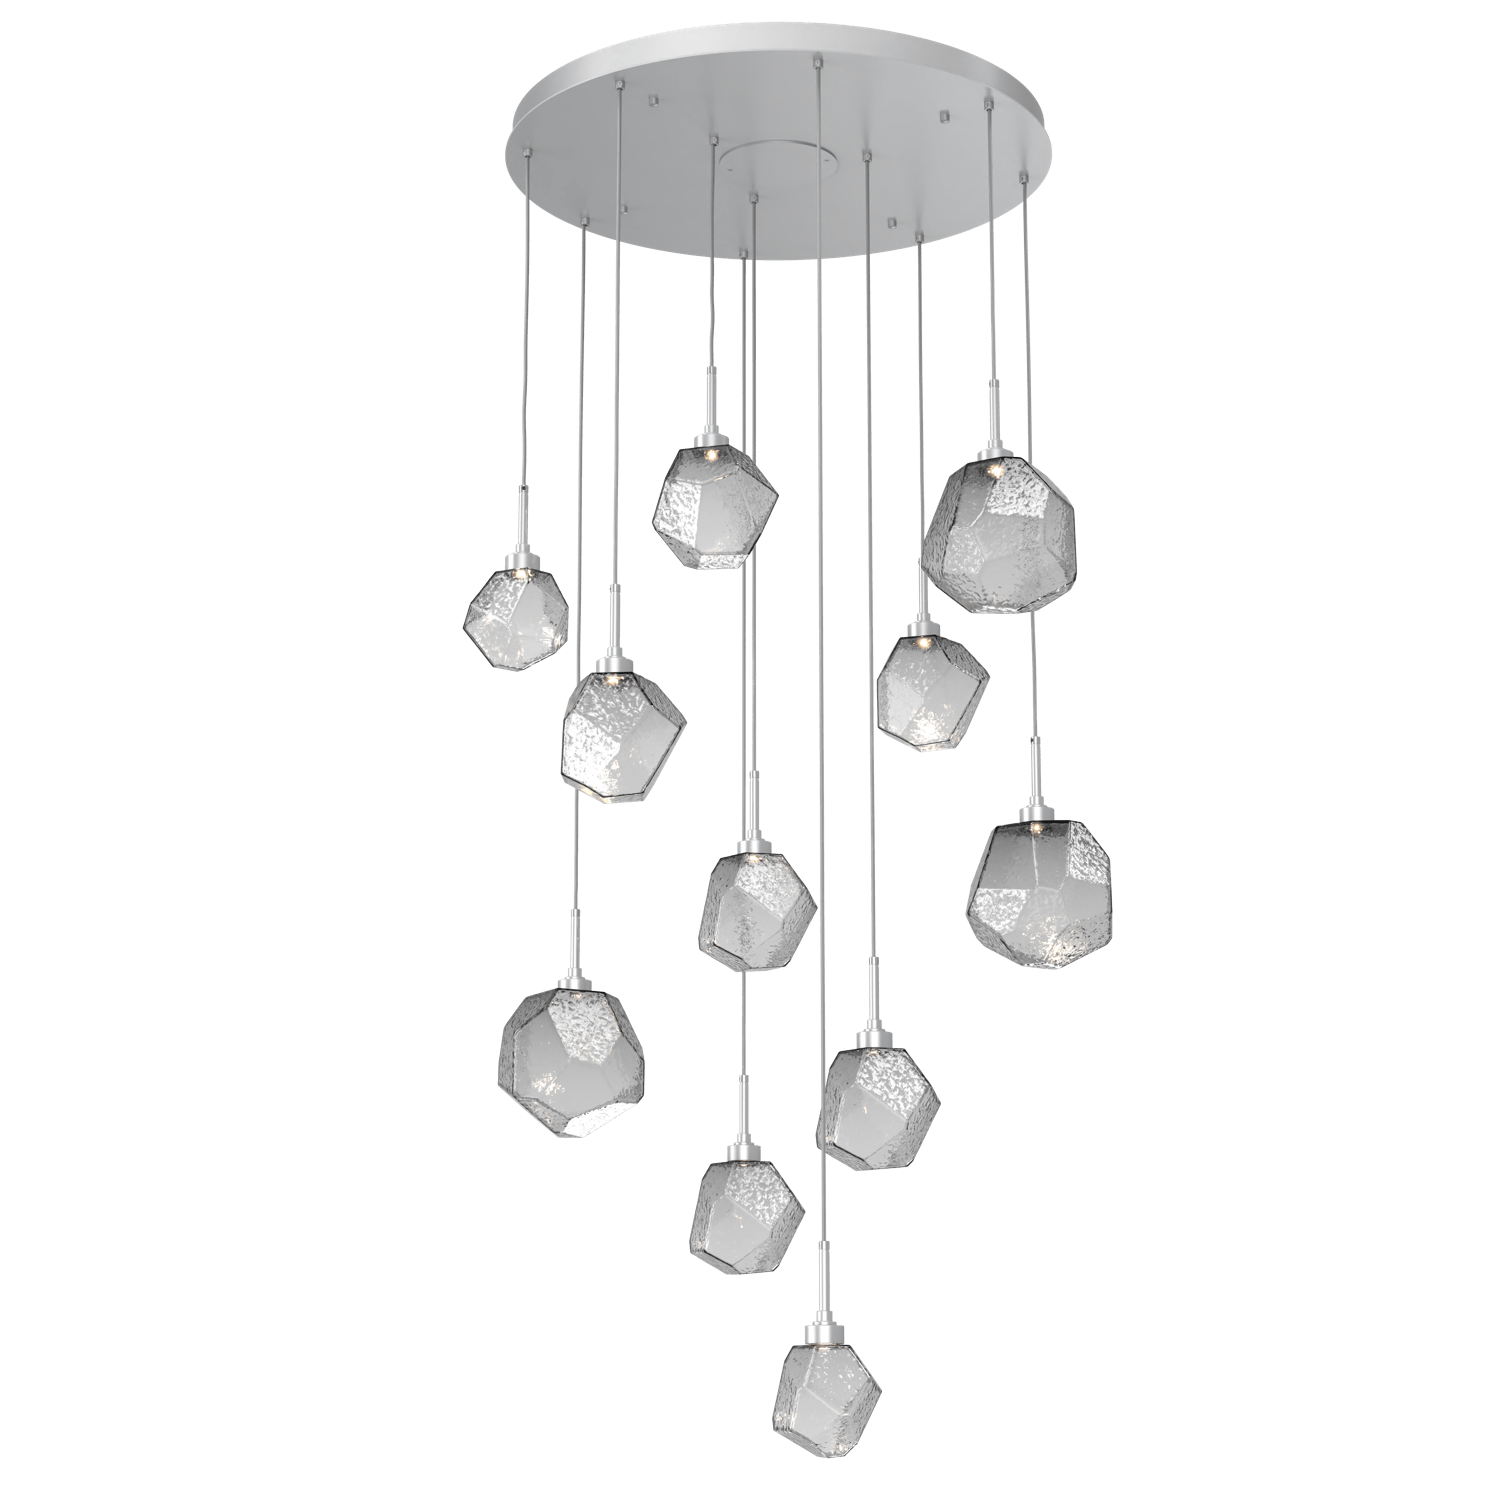 CHB0039-11-CS-S-Hammerton-Studio-Gem-11-light-round-pendant-chandelier-with-classic-silver-finish-and-smoke-blown-glass-shades-and-LED-lamping